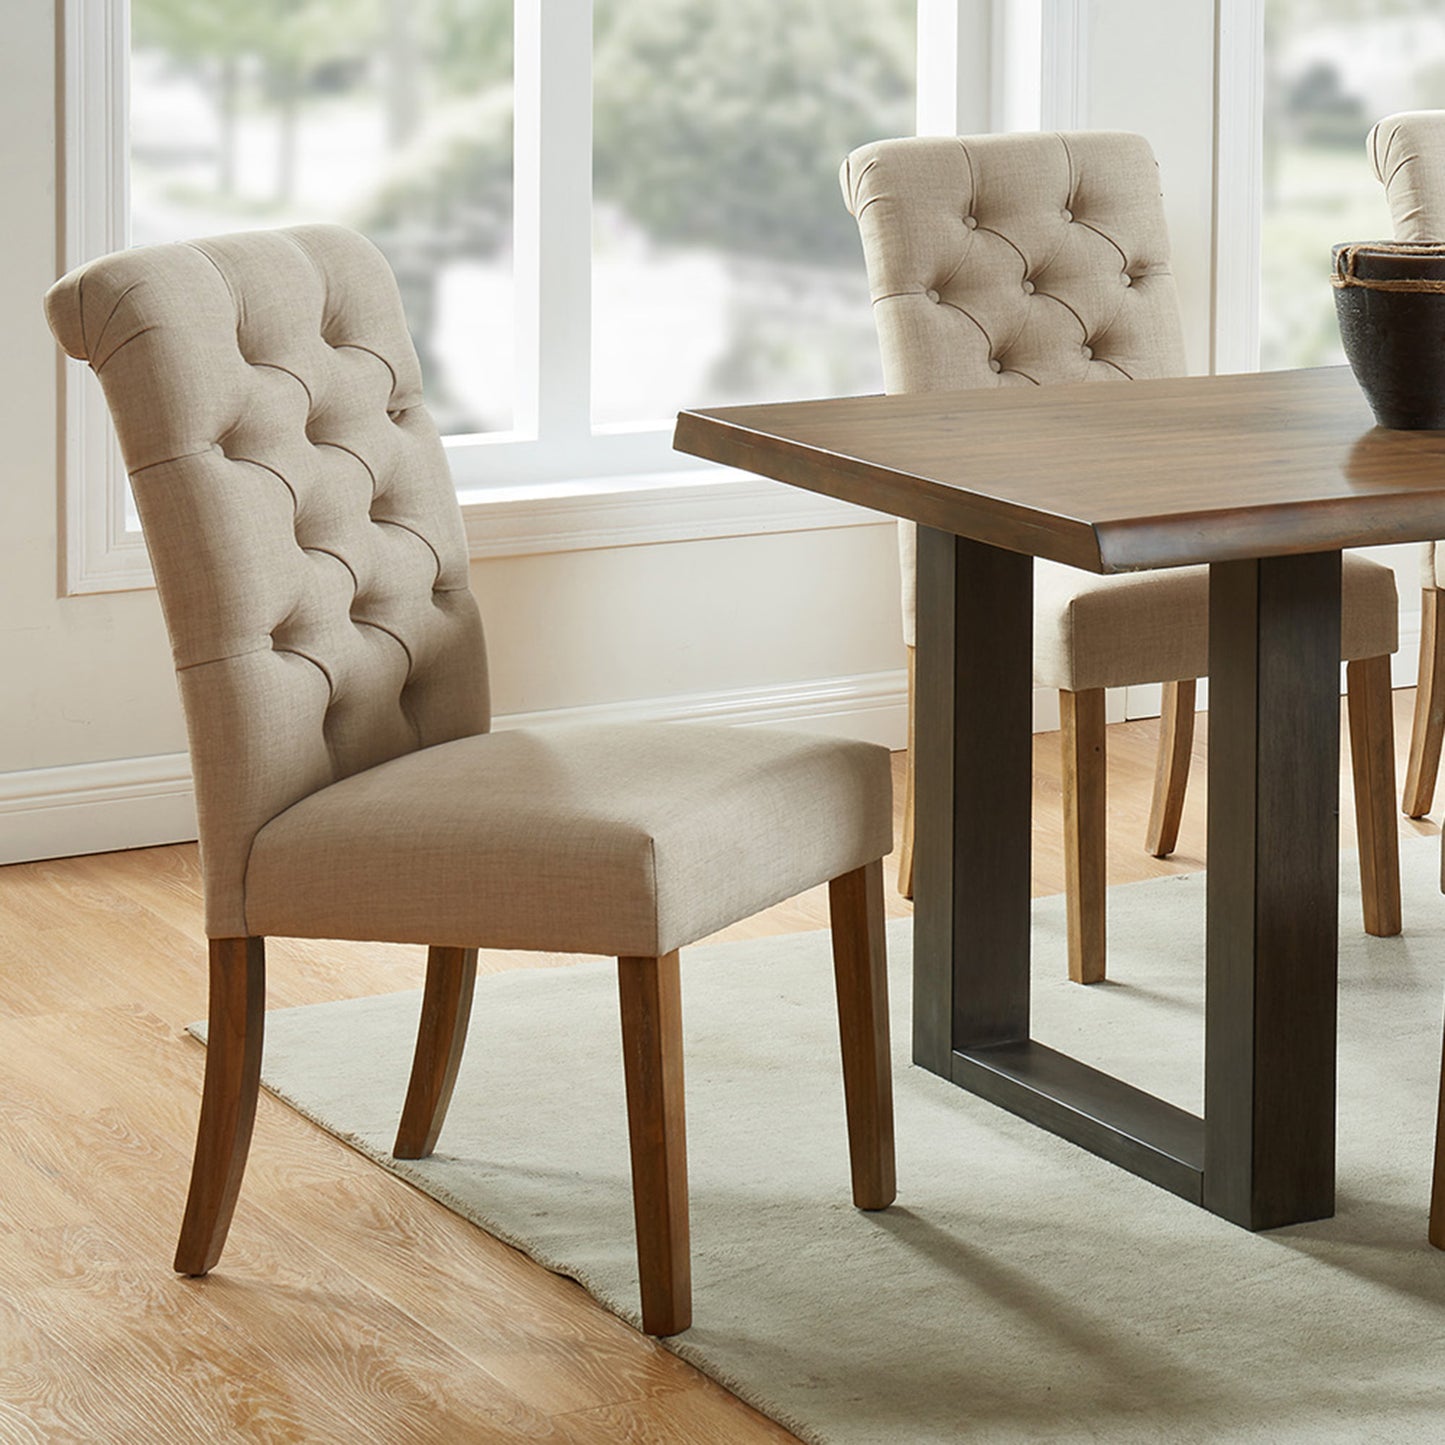 (MELIA BEIGE- 2 pack)- FABRIC- DINING CHAIR